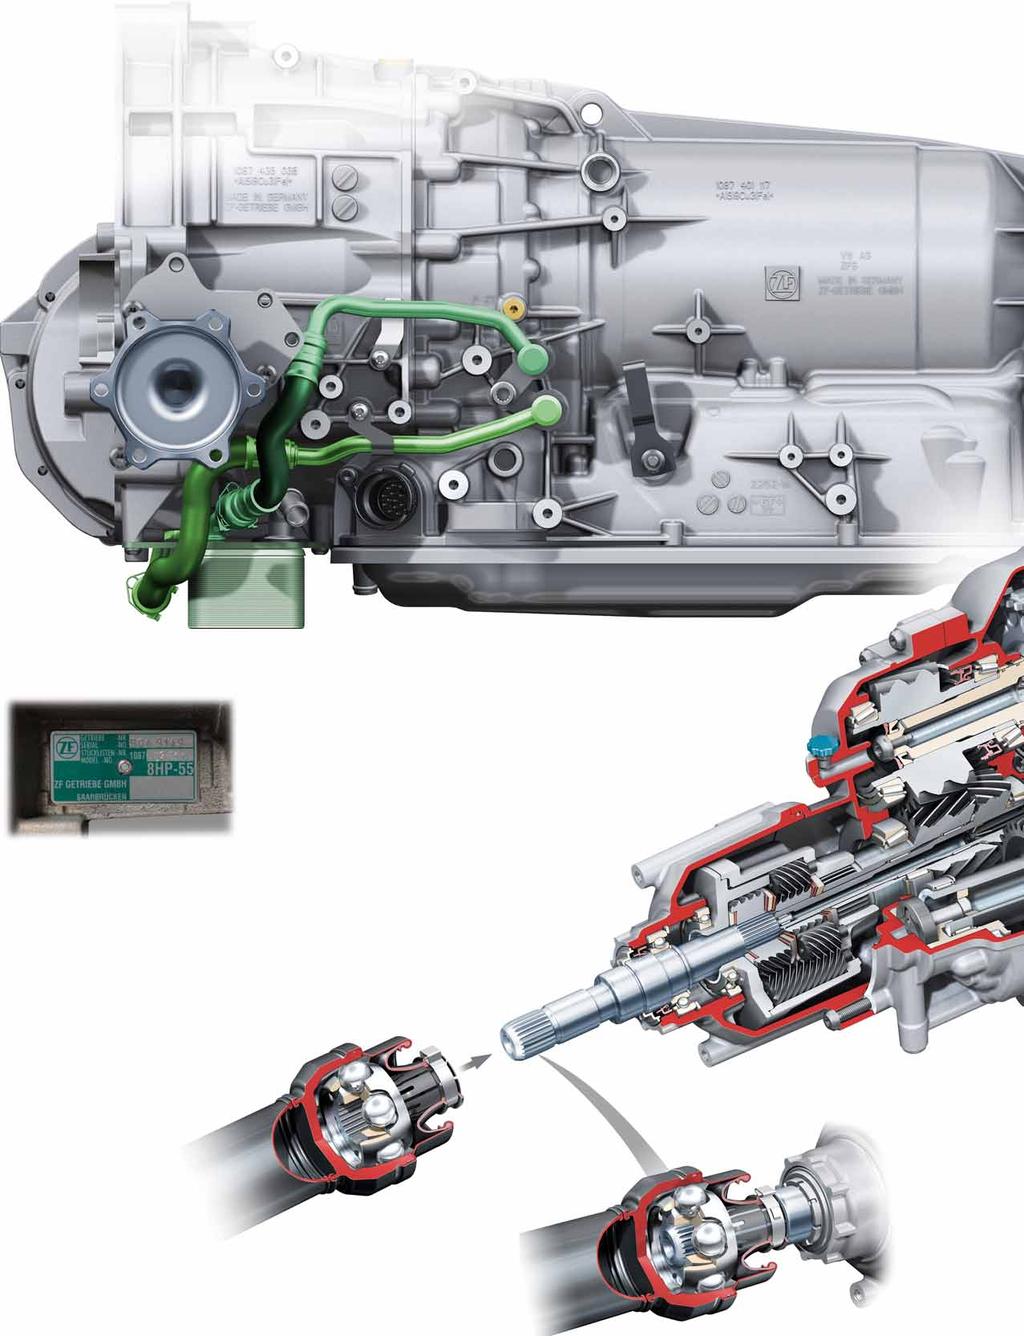 Special features and common features at a glance The illustrations show the 0BK gearbox Connector to vehicle electrical system ATF cooler (heat exchanger) mounted on gearbox Gearshift lever for